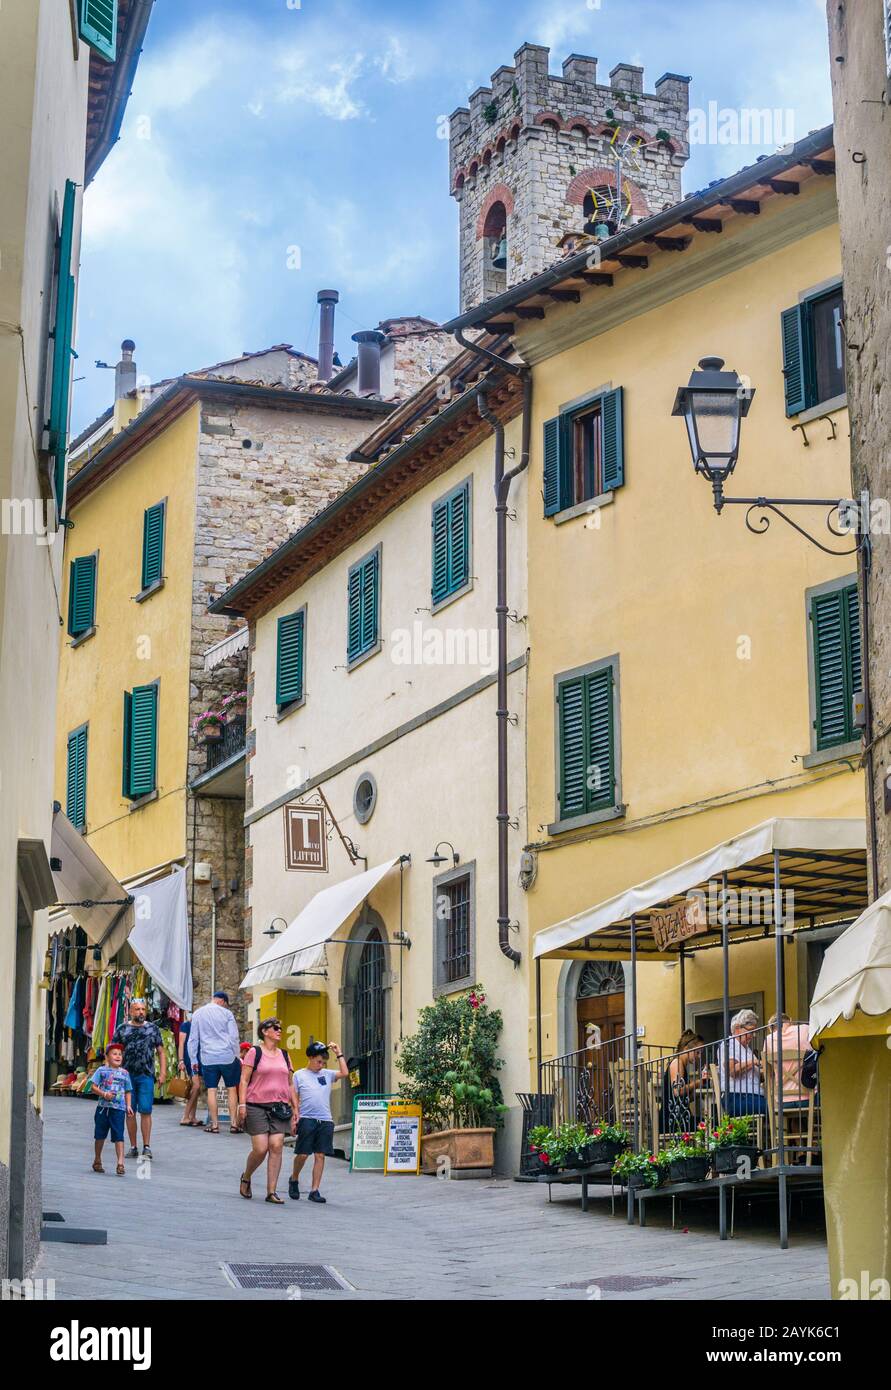 the medieval town of Radda in Chianti, characterized by narrow streets and tower buildings, Chianti Region, Tuscany, Italy Stock Photo